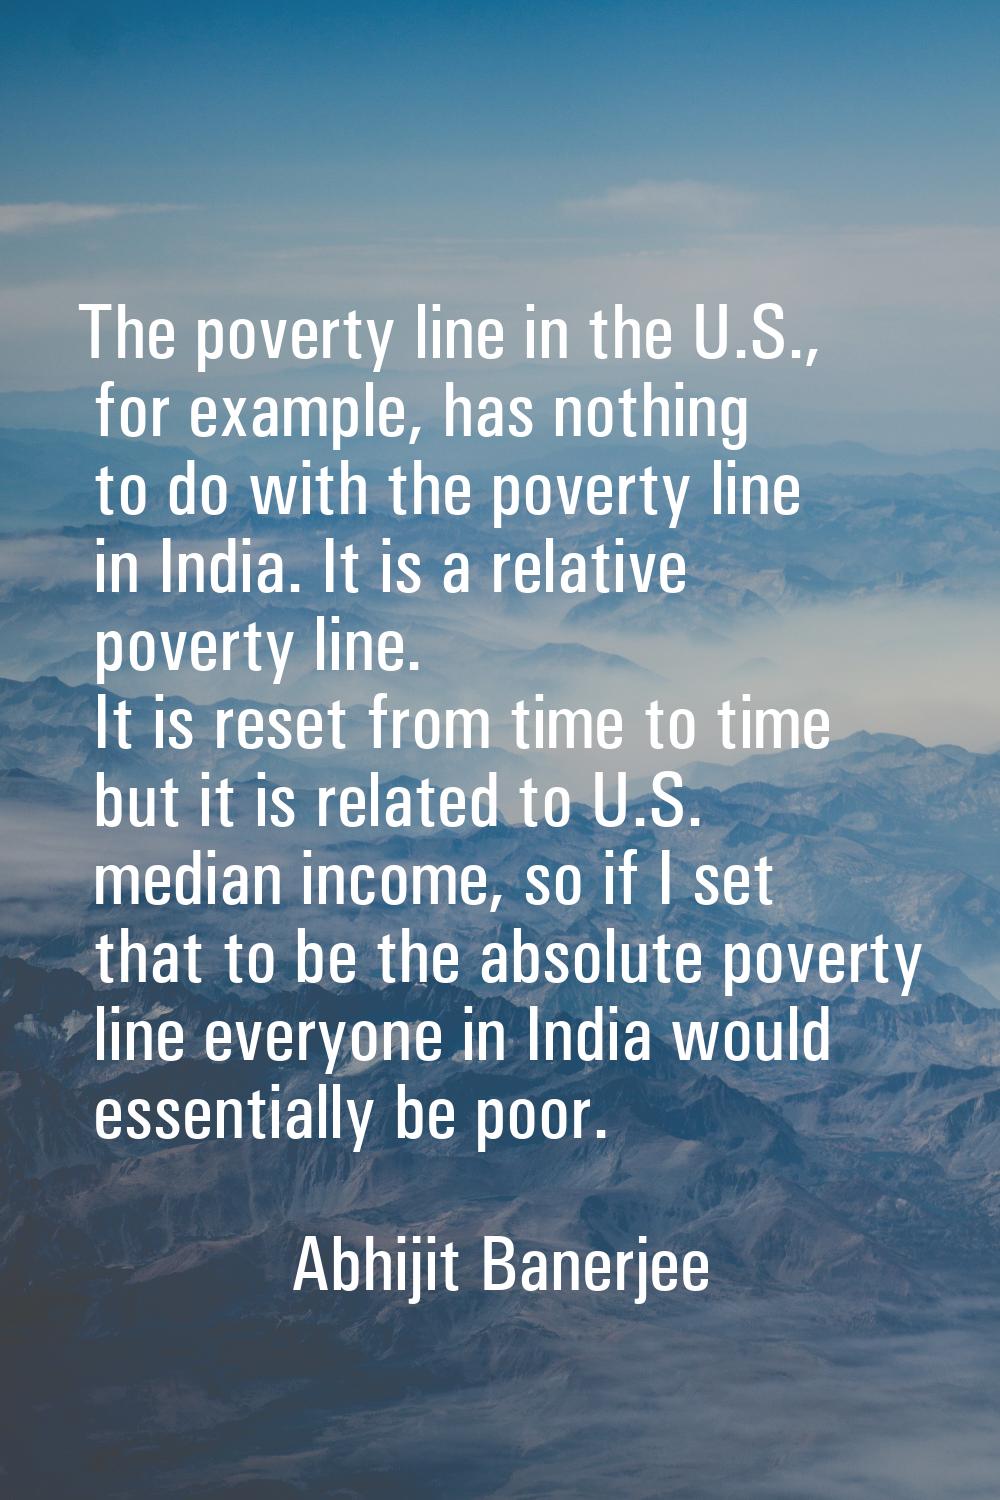 The poverty line in the U.S., for example, has nothing to do with the poverty line in India. It is 